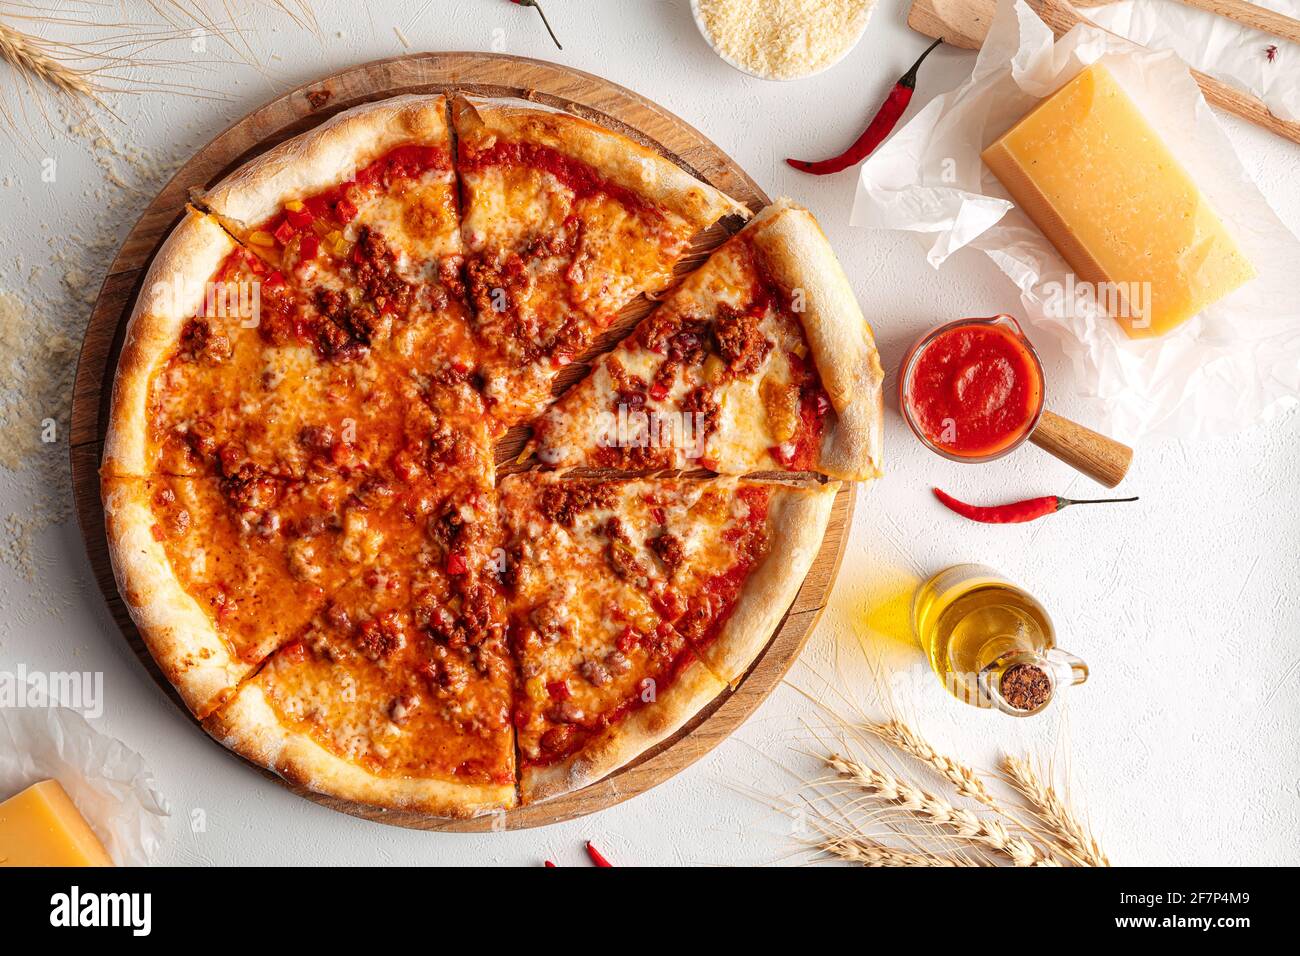 Sliced hot spicy pizza with minced meat Stock Photo